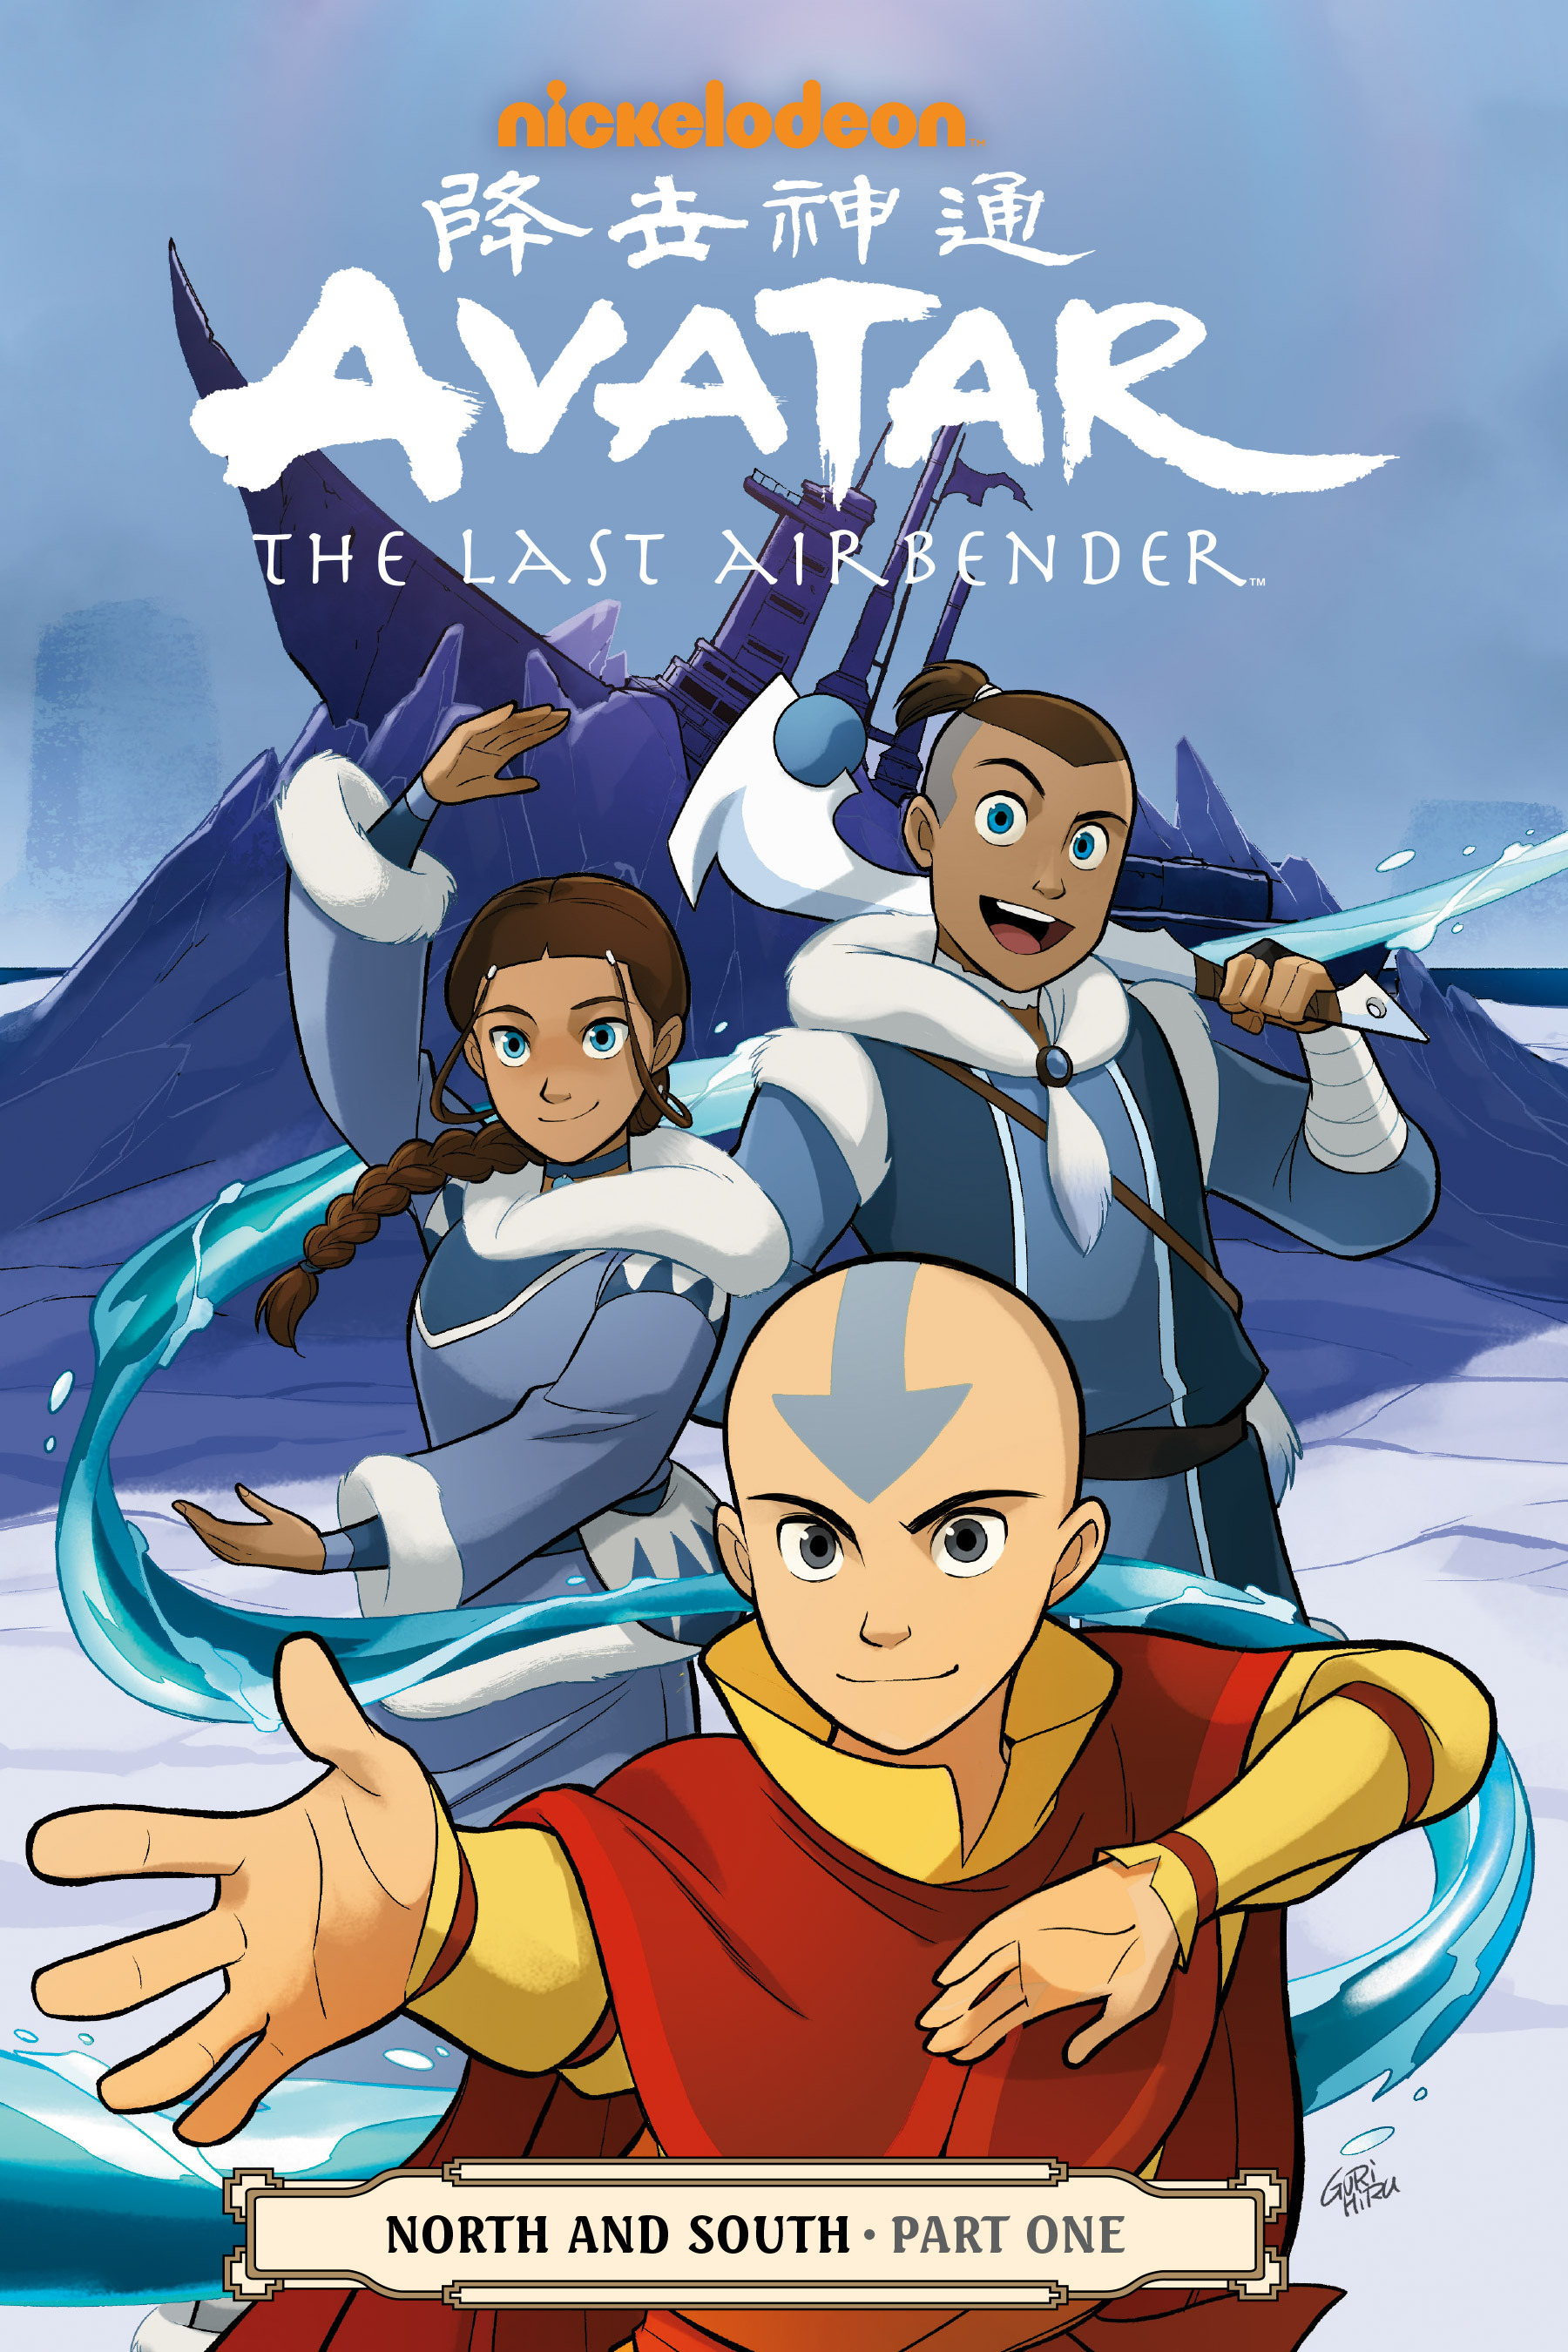 North and south avatar the last airbender